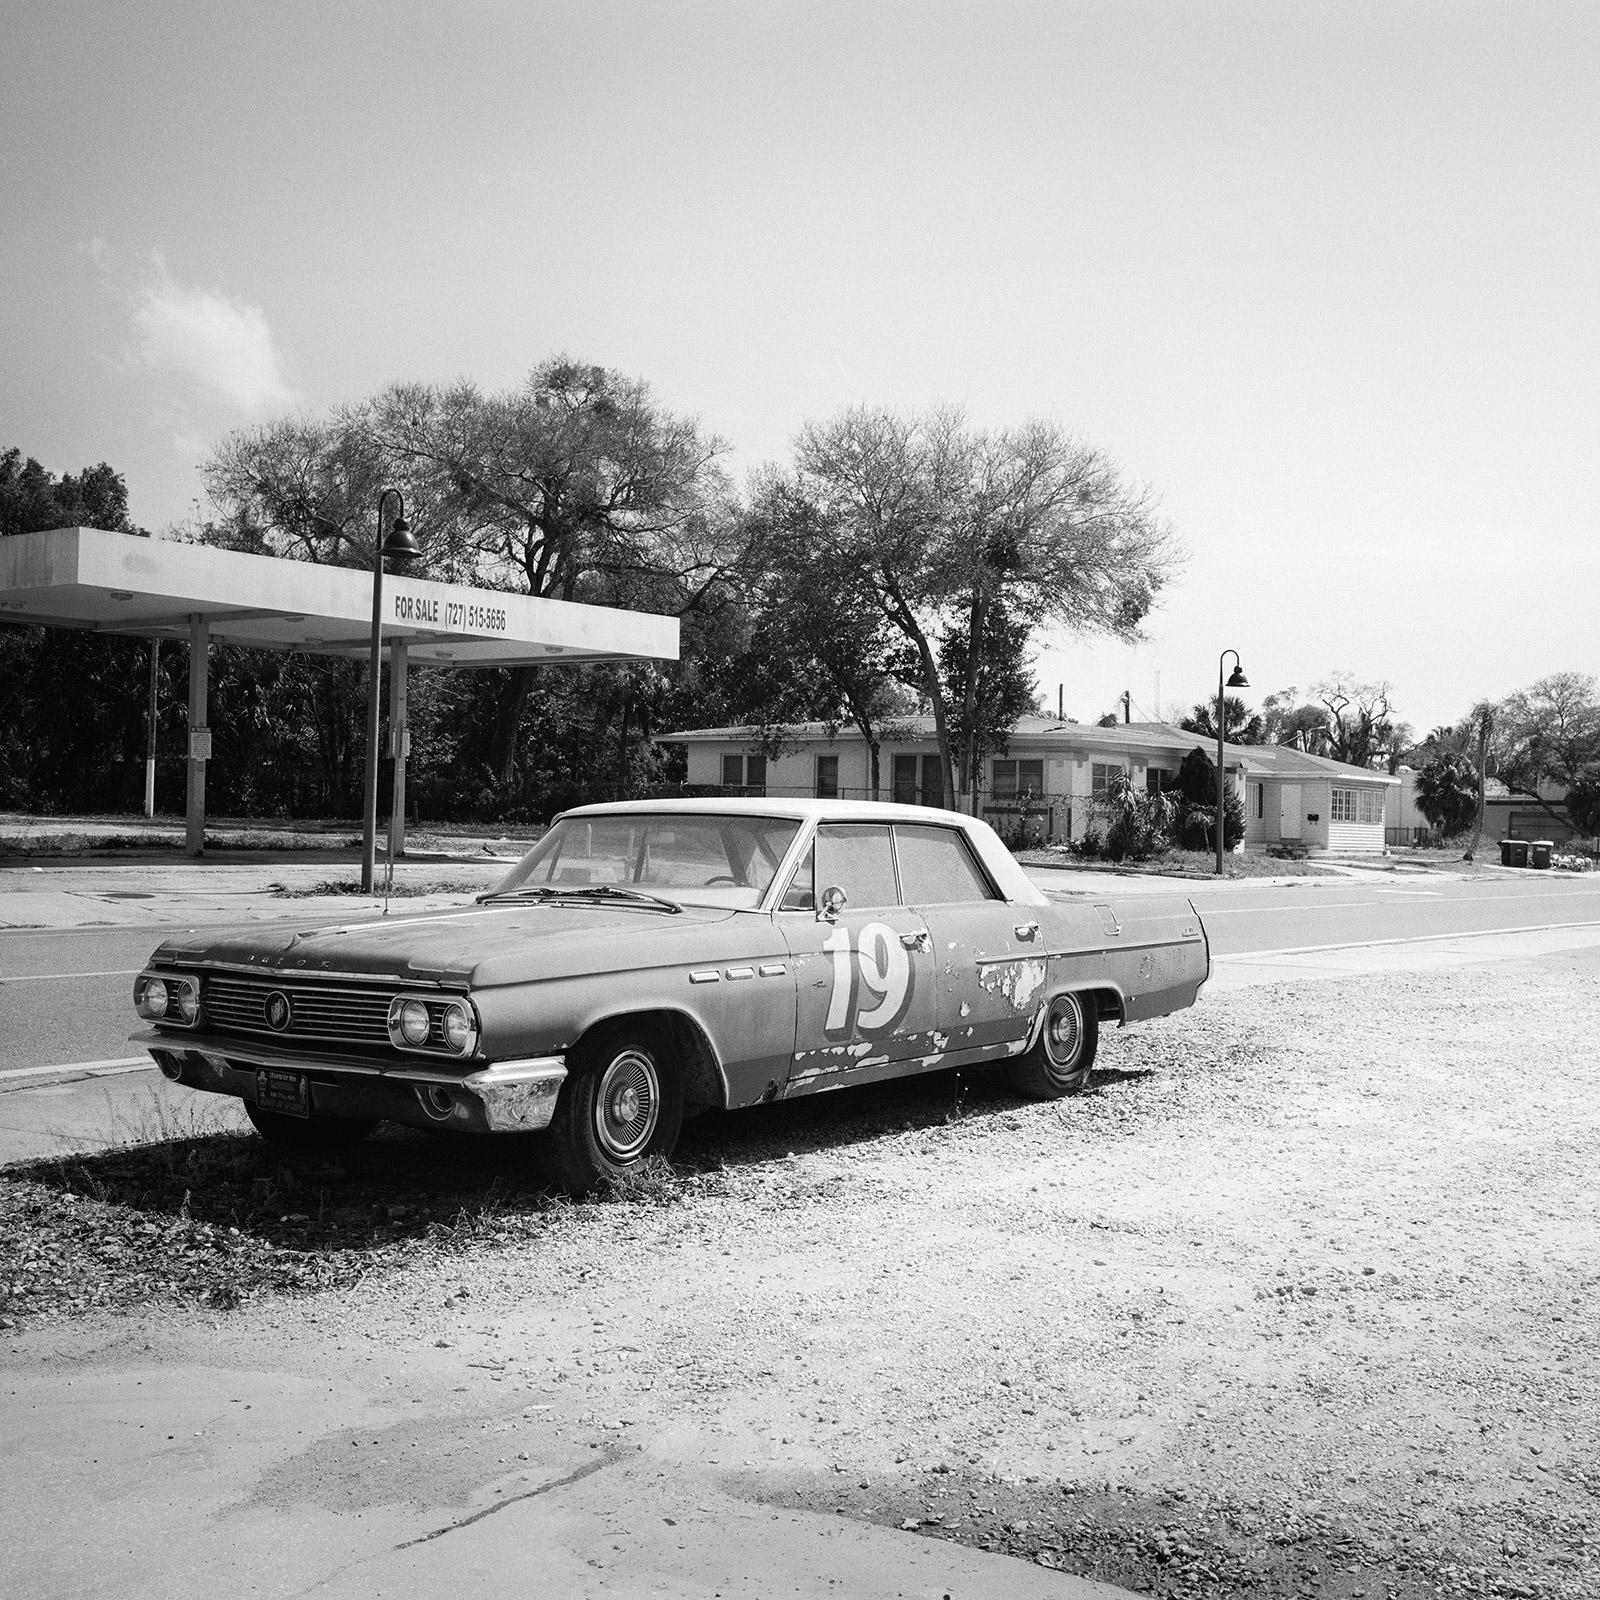 Buick for sale, classic car, Florida, USA, black and white landscape photography